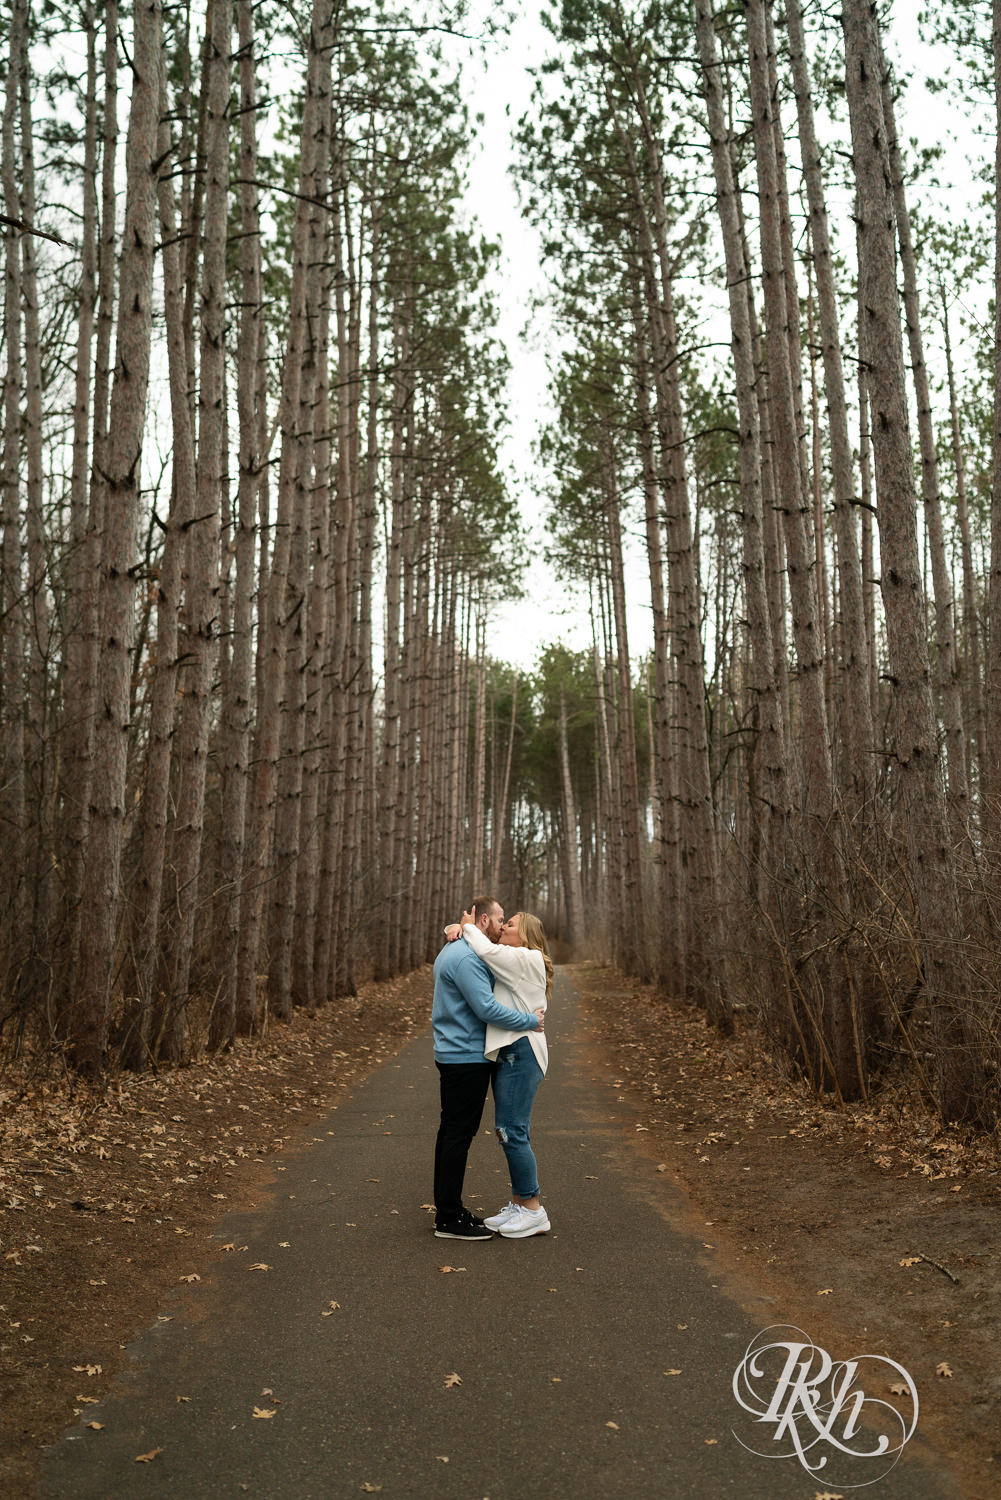 Man in blue shirt and woman in jeans kiss between tall trees during engagement photography at Rice Creek Regional Trail in Shoreview, Minnesota.